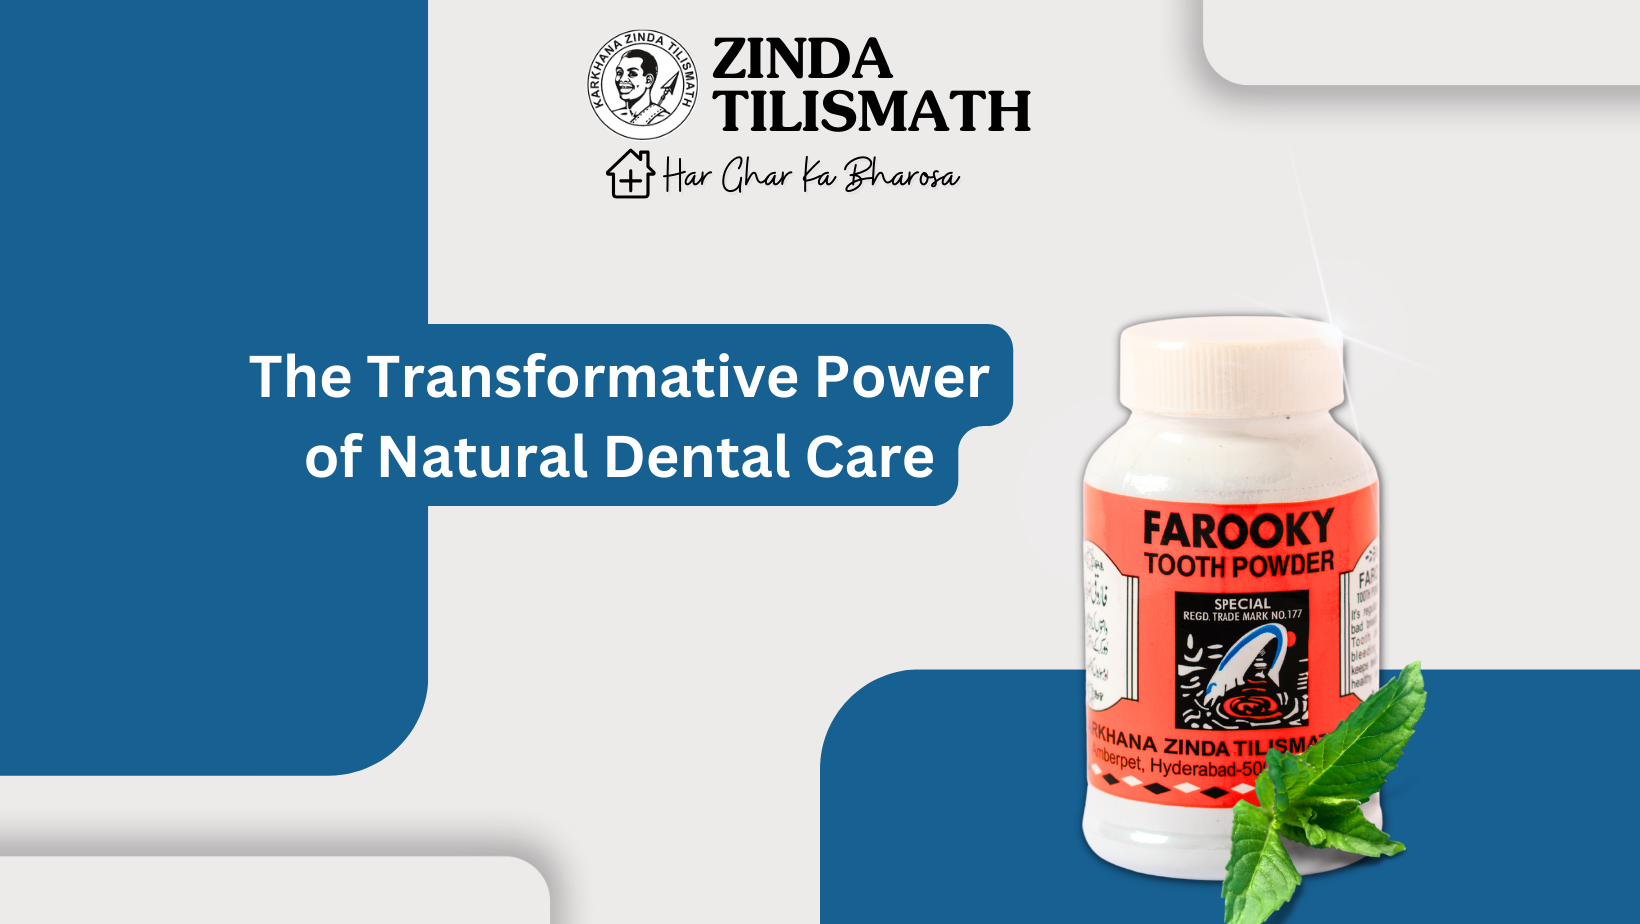 The Transformative Power of Natural Dental Care